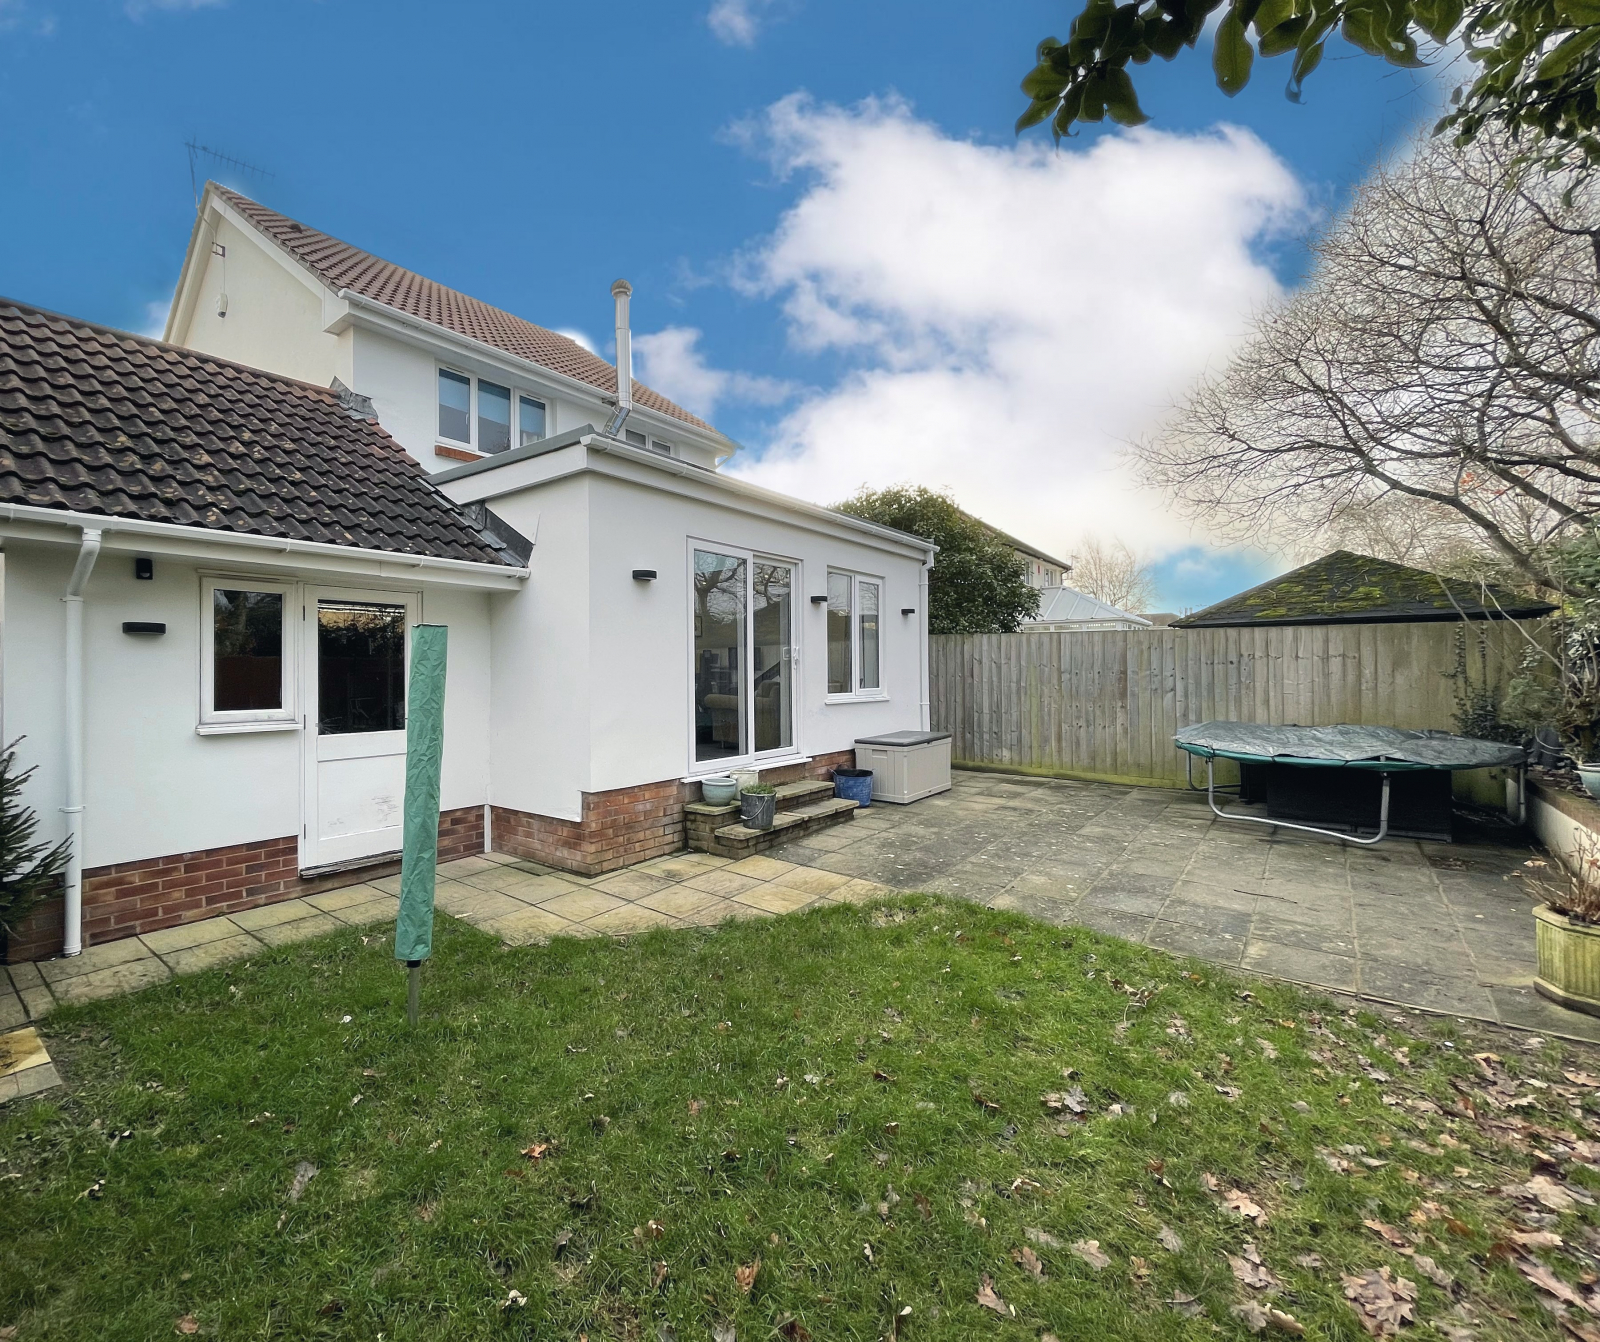 3 bed detached house for sale in Roundswell, Devon  - Property Image 5